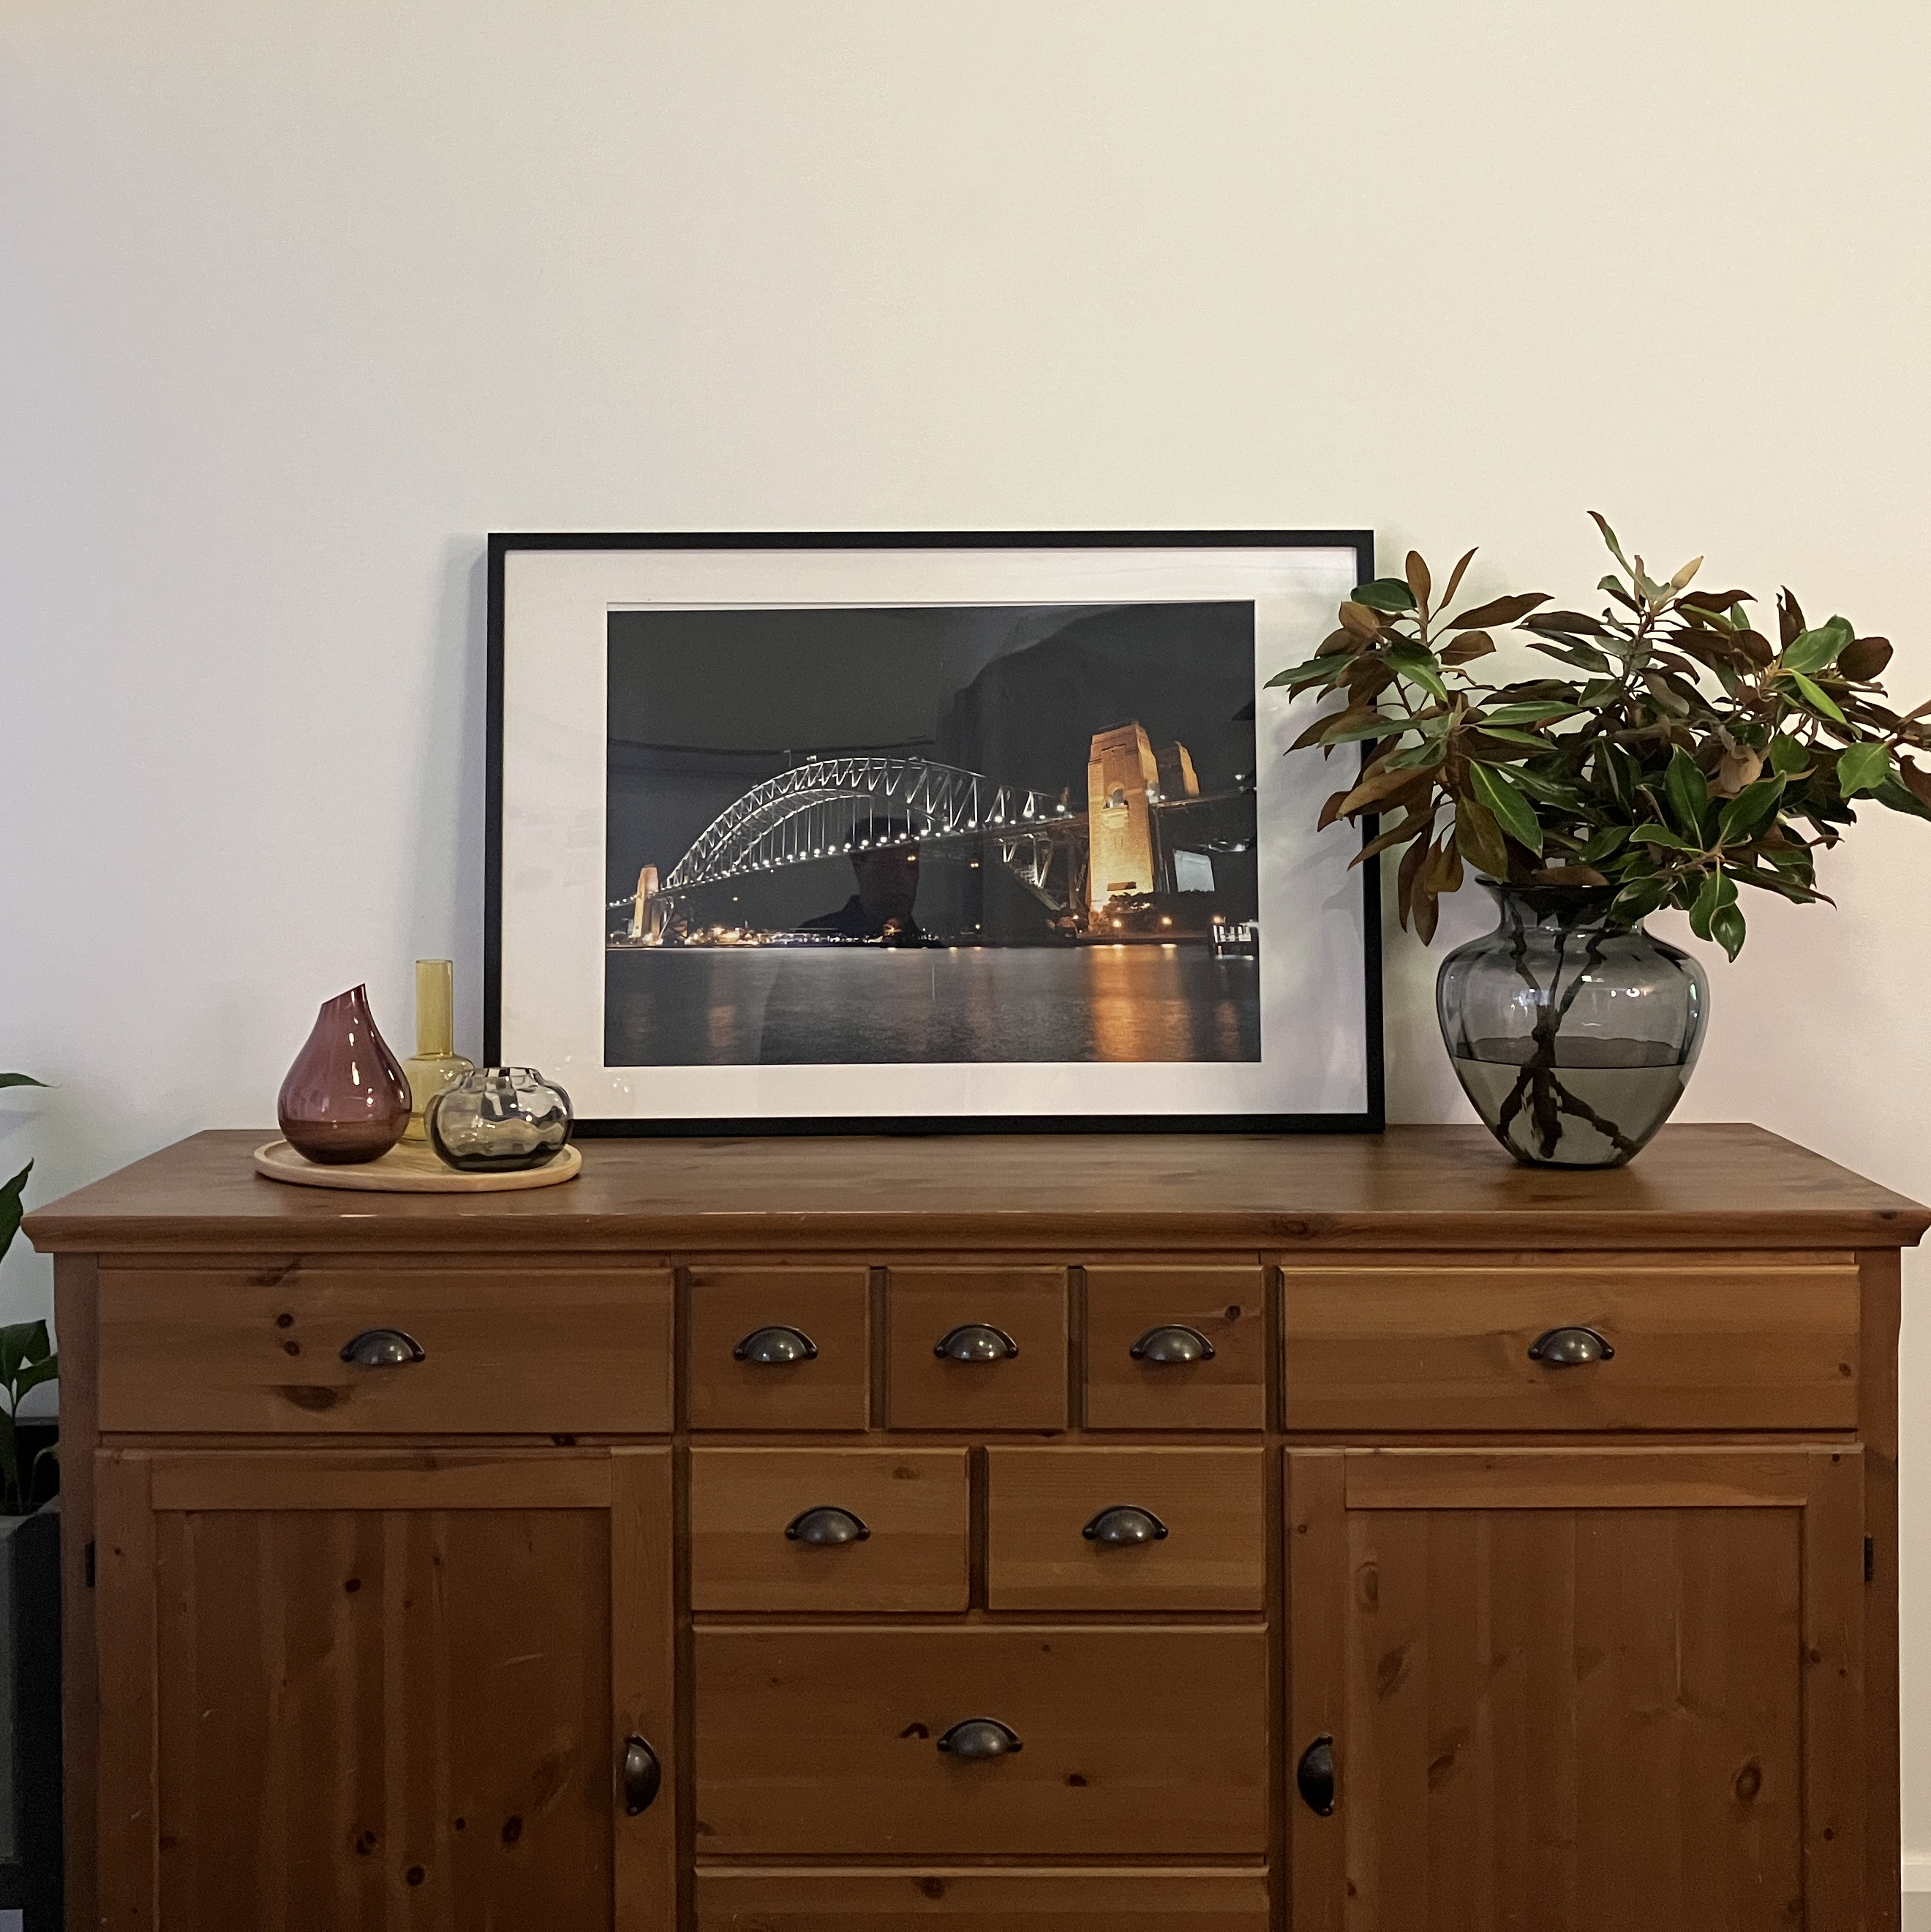 Decluttered and styled sideboard